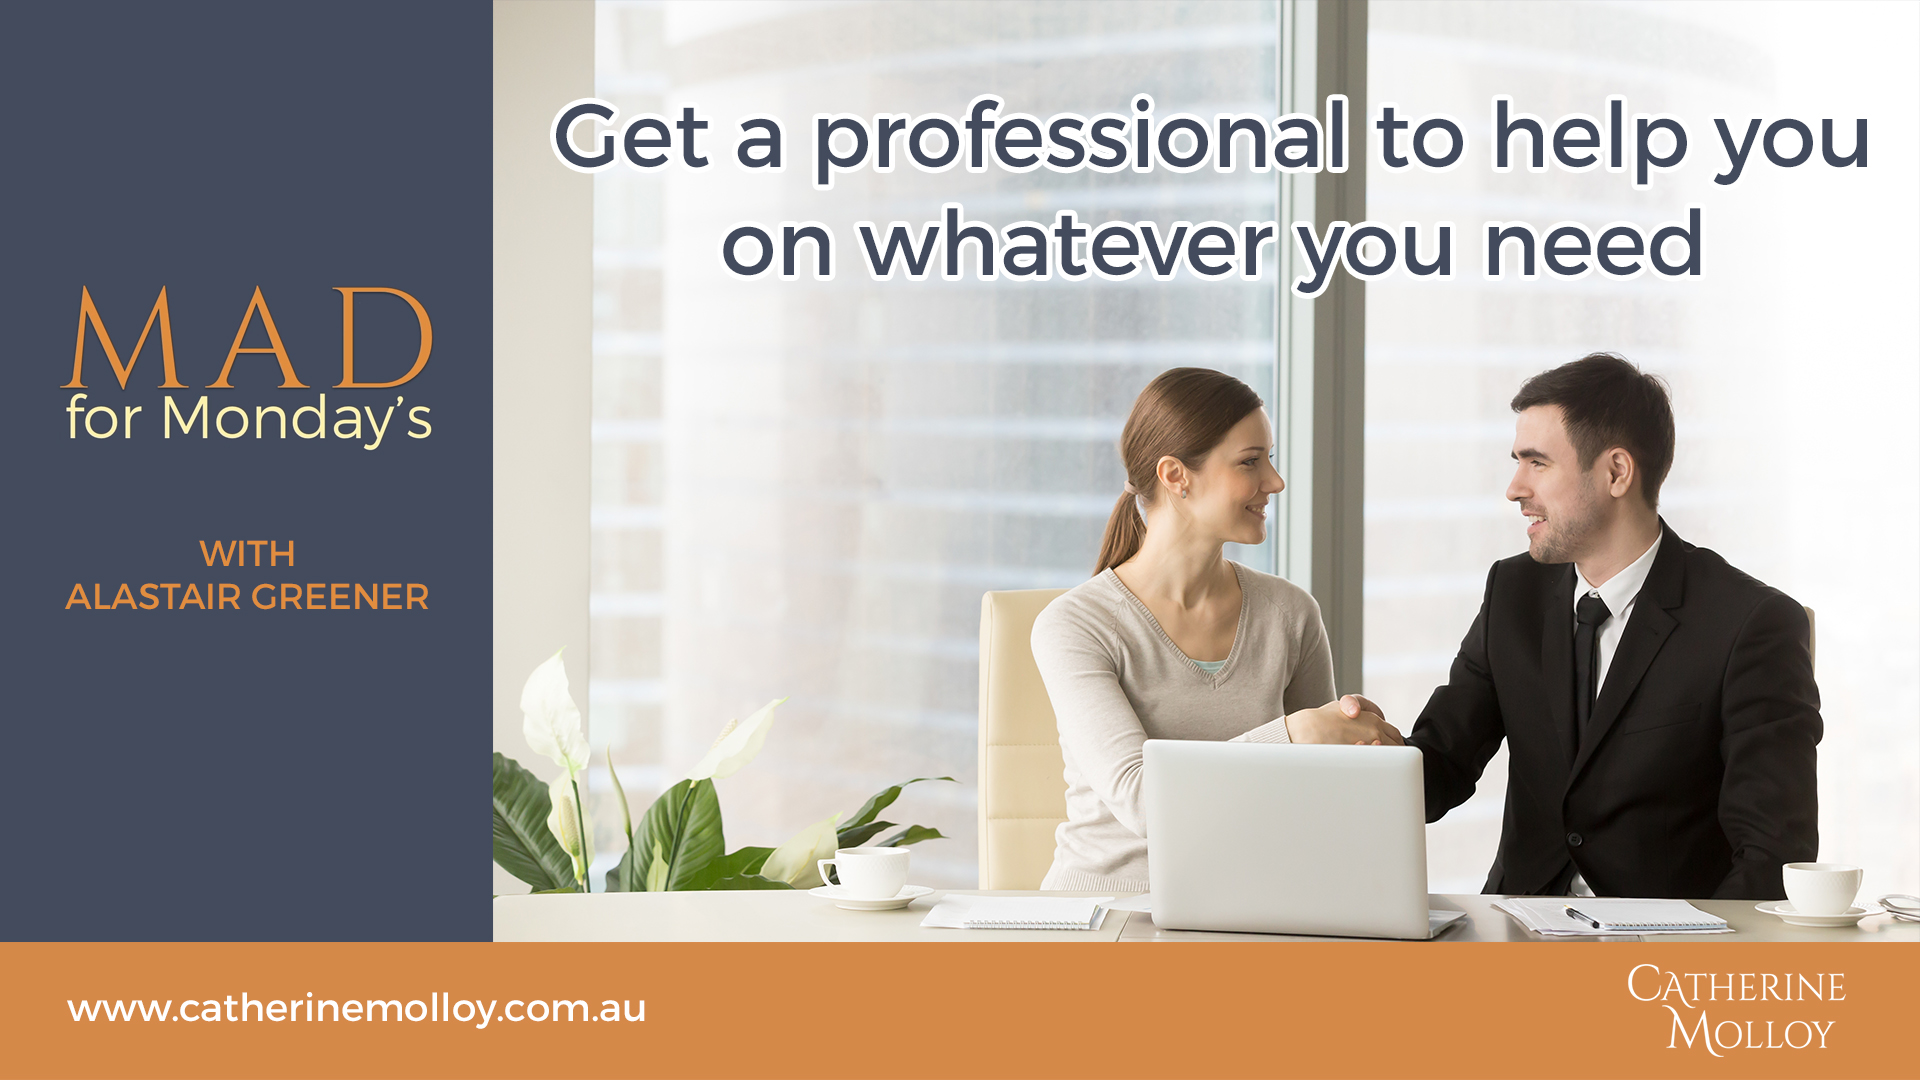 MAD for Monday’s – Get a professional to help you on whatever you need